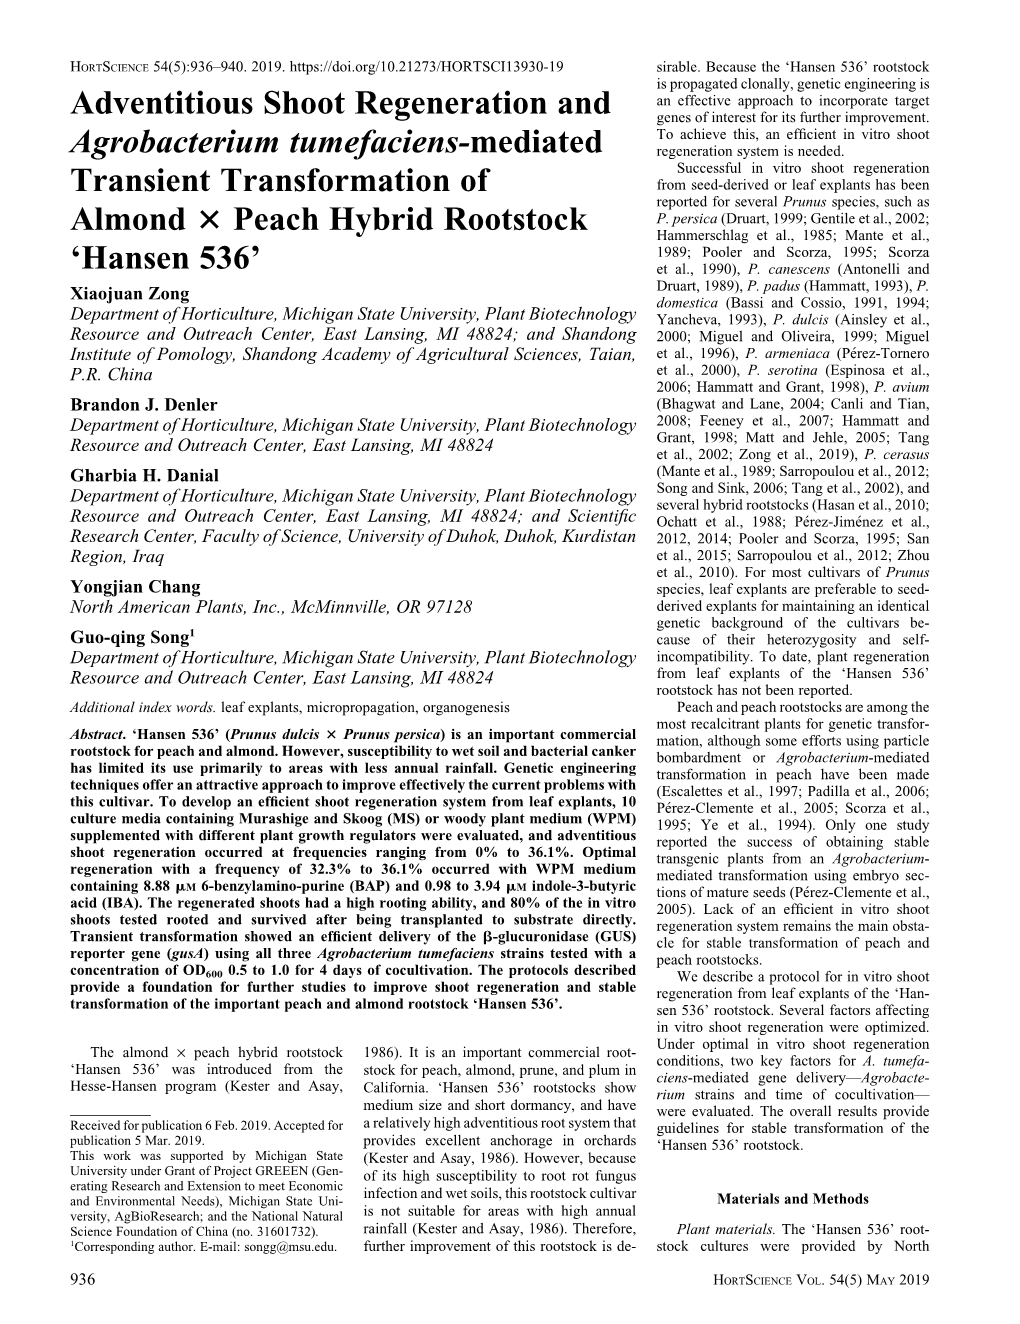 Adventitious Shoot Regeneration and Agrobacterium Tumefaciens-Mediated Transient Transformation of Almond 3 Peach Hybrid Rootsto